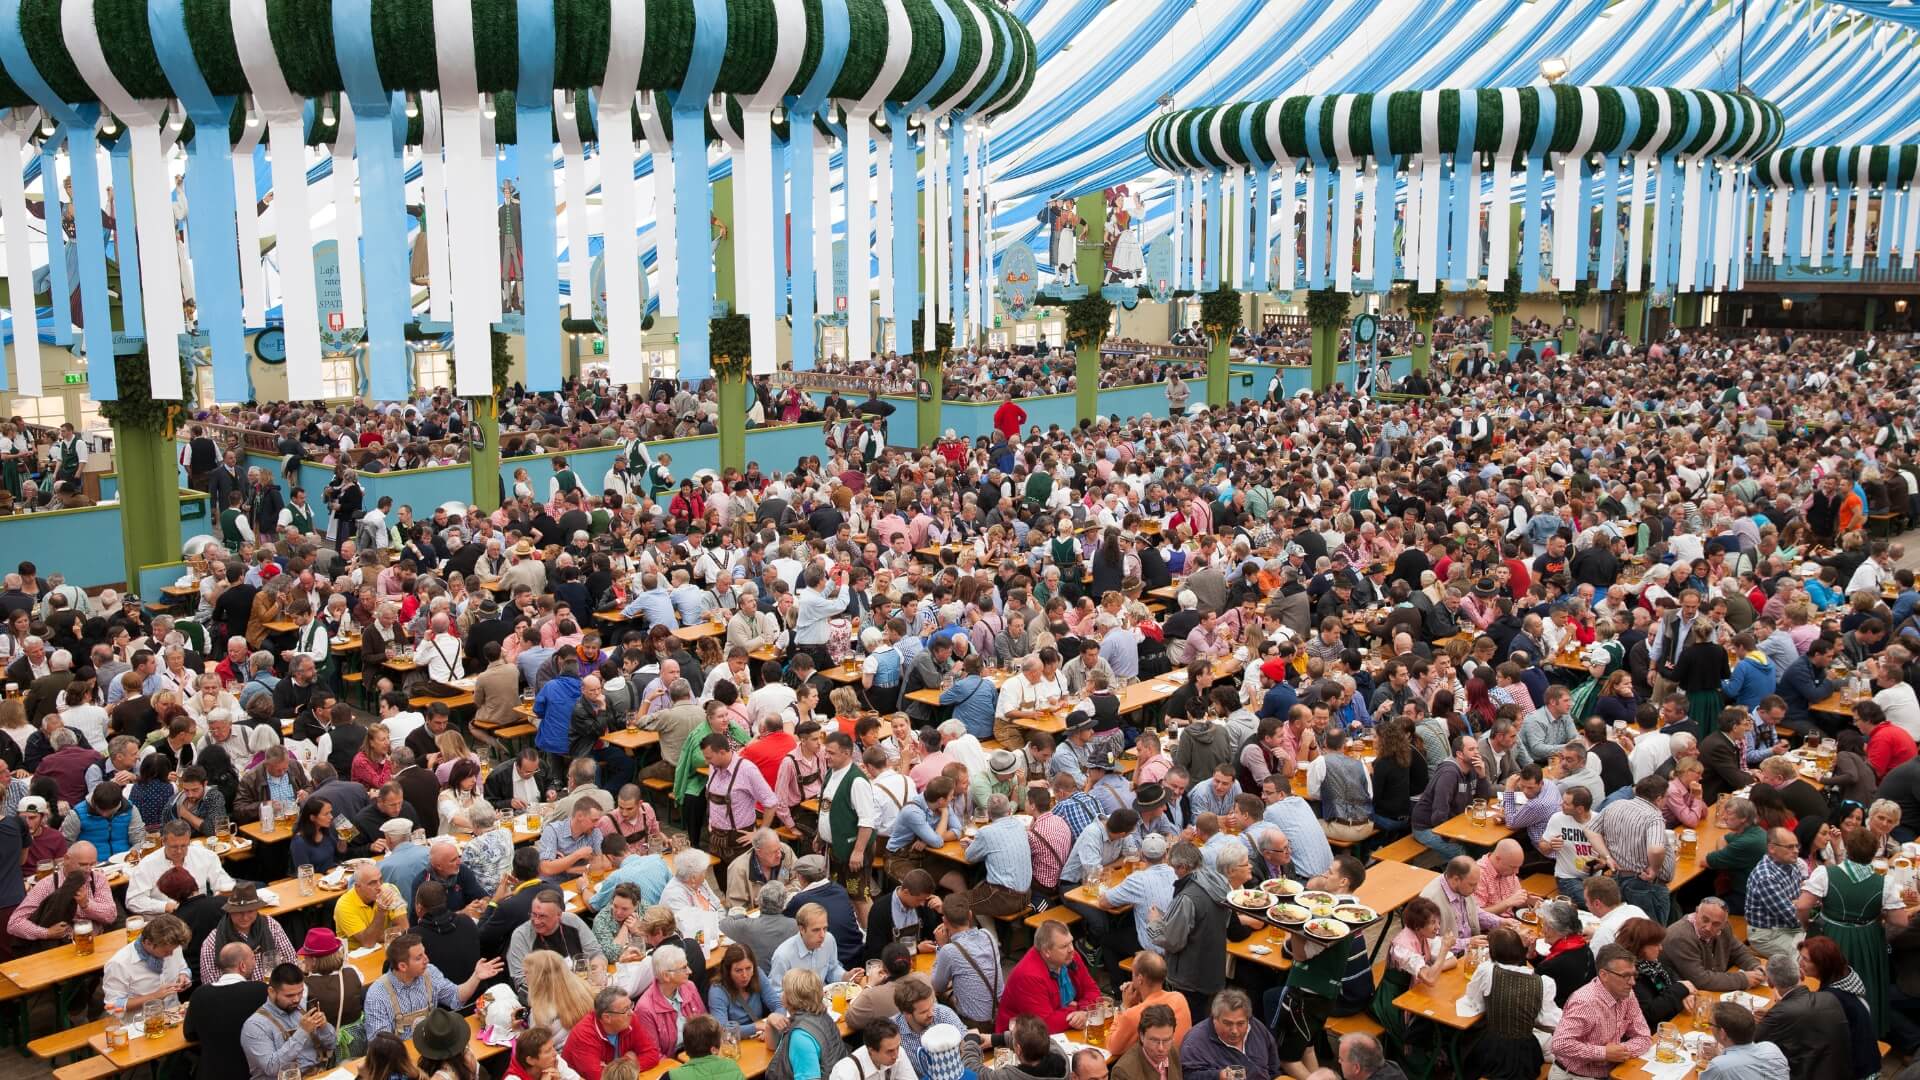 At Oktoberfest, people sit on the beer garden table sets with leg room.